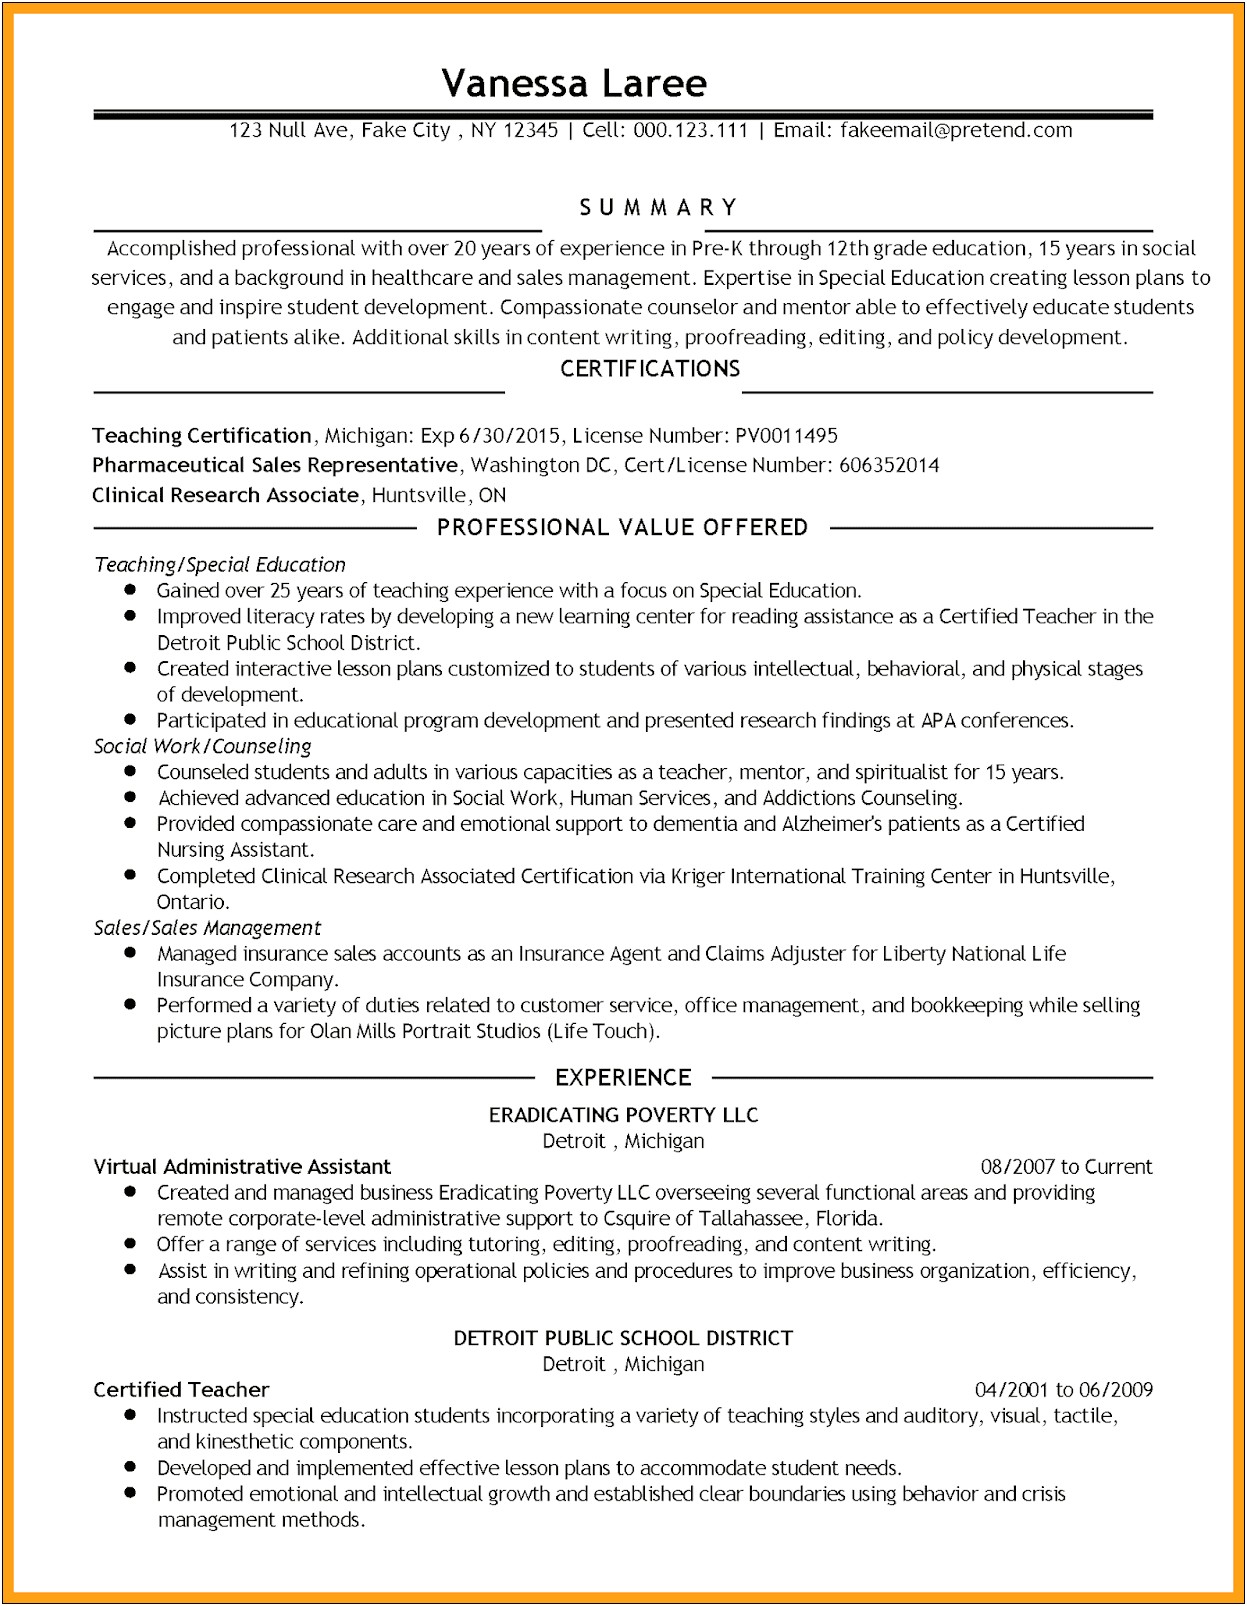 Resume Objectives For Guidance Counselor